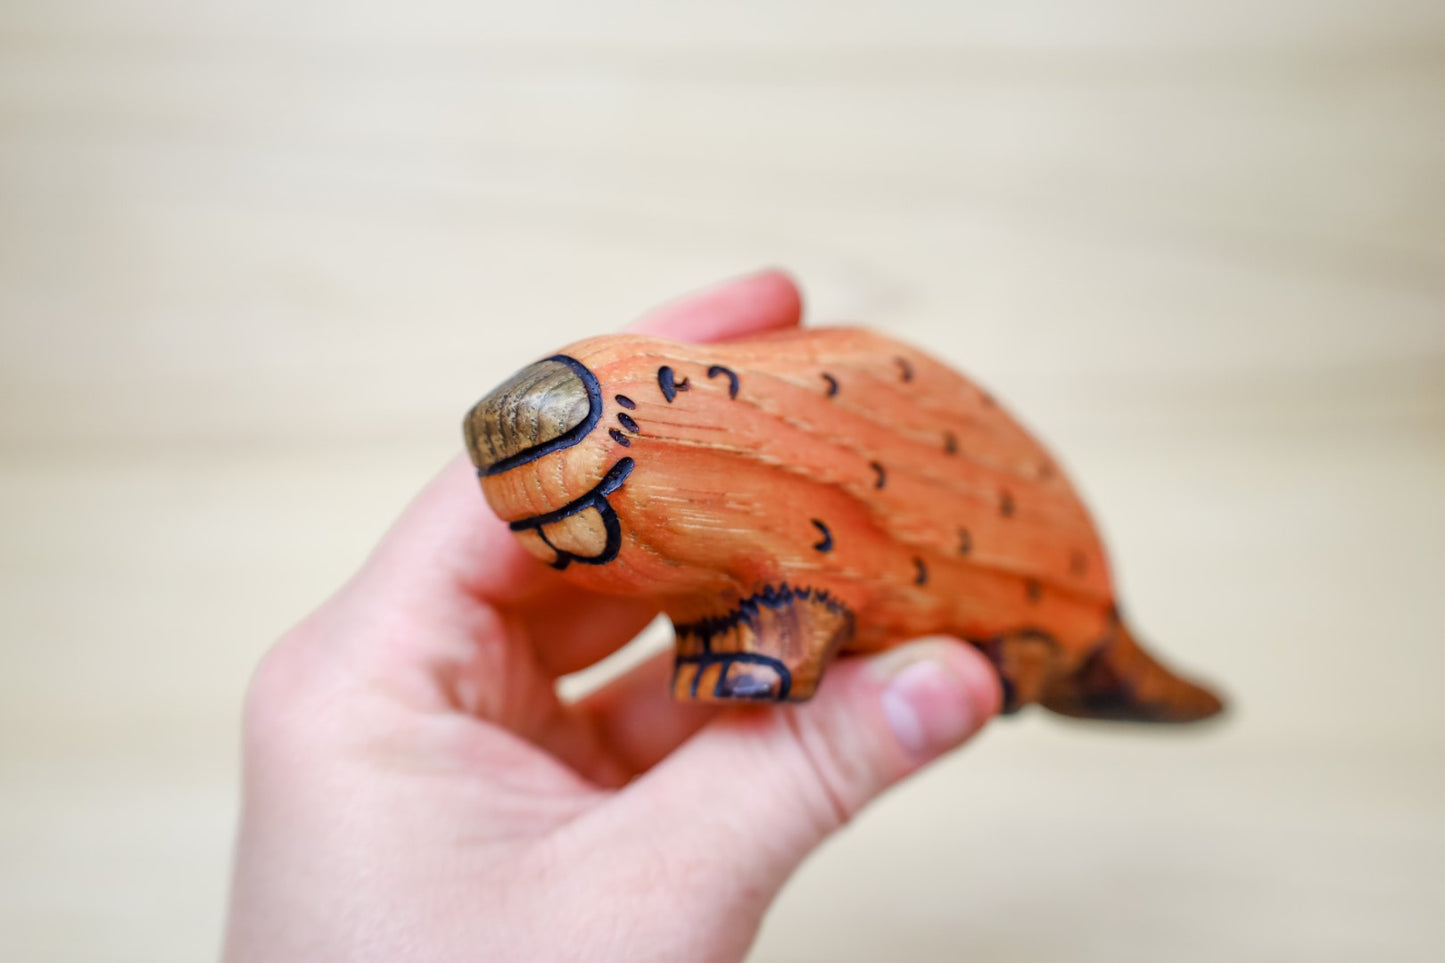 Wooden Beaver Toy